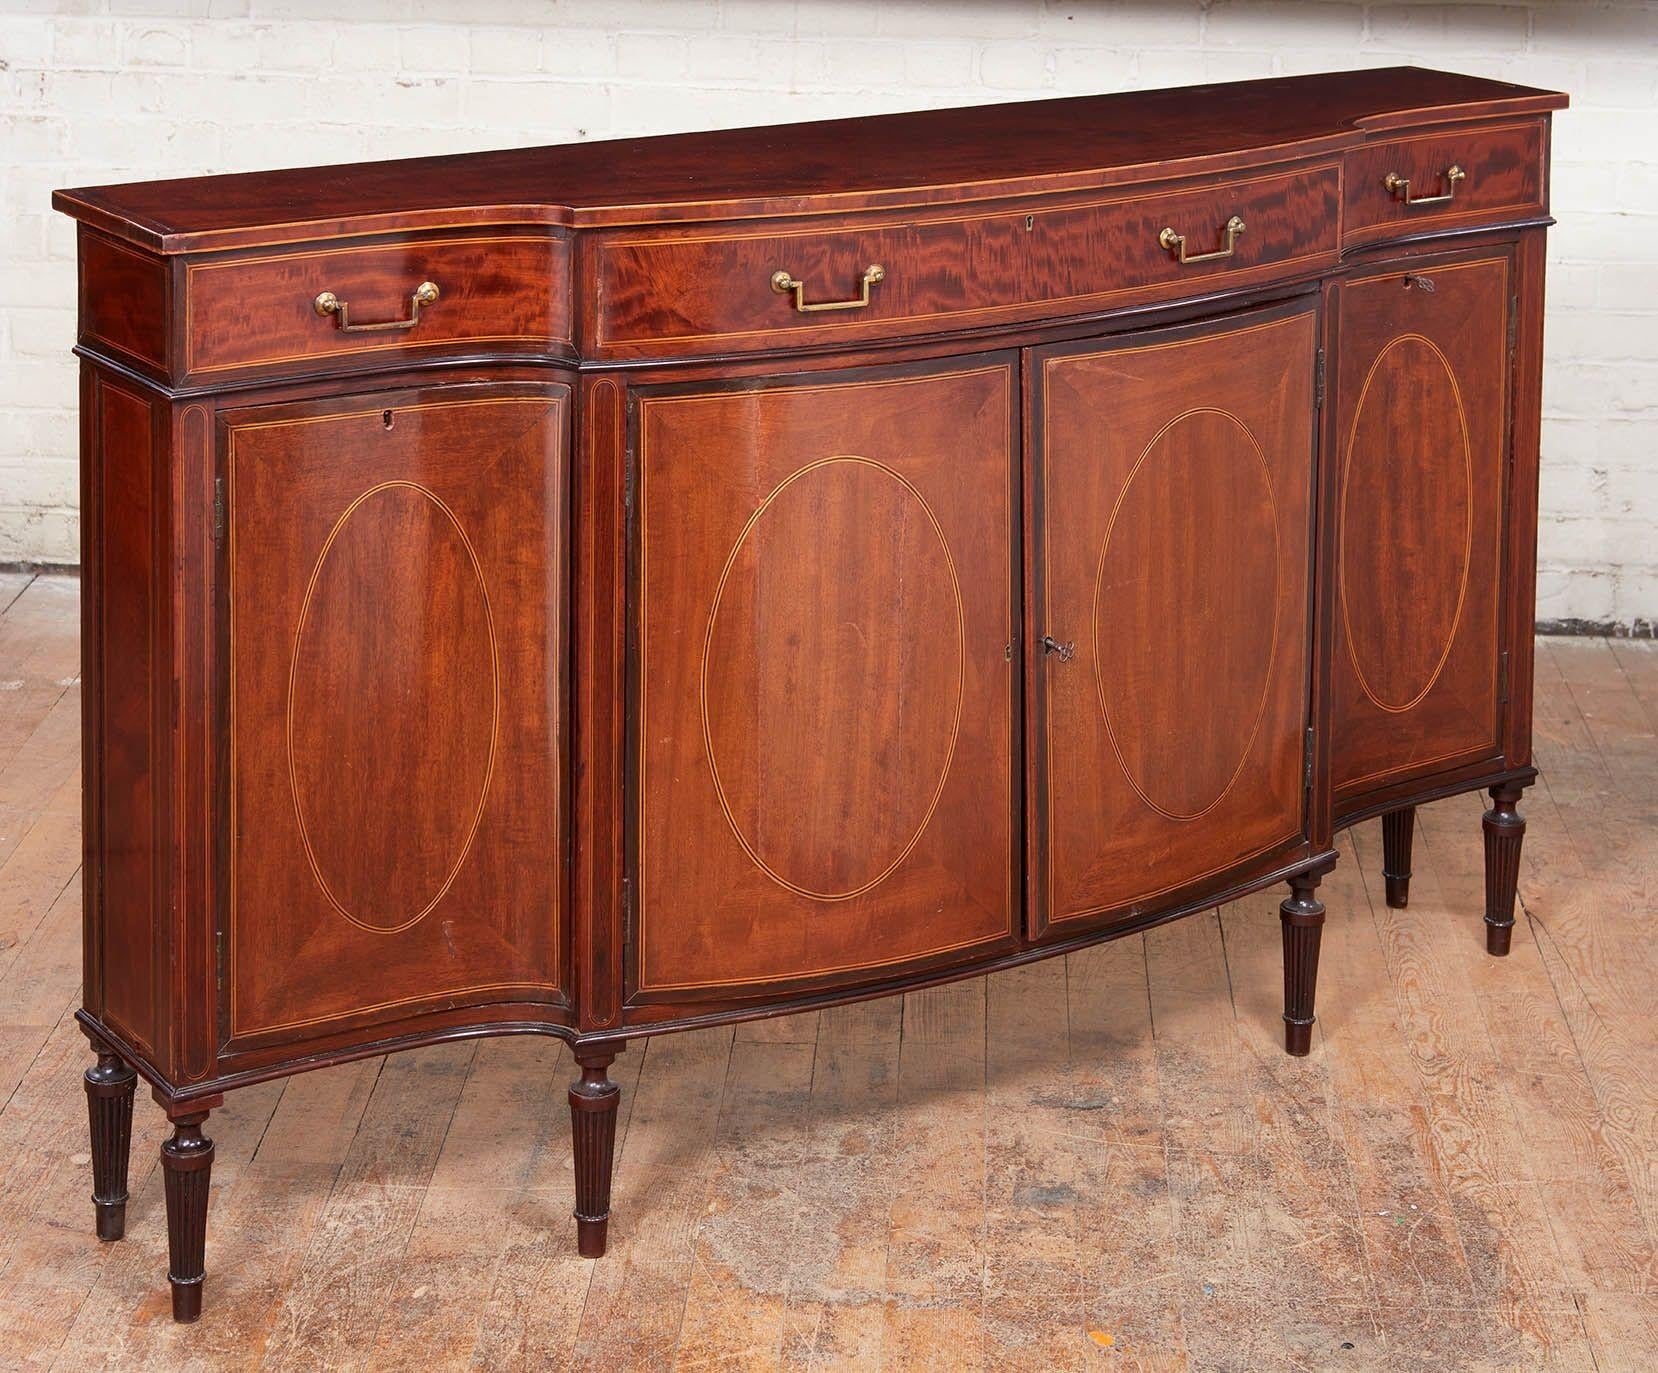 Fine George III style inlaid mahogany credenza of unusually narrow size by leading London manufacturers Wright and Mansfield, having rosewood and holly crossbanded top over bank of drawers with original brass hardware over four cabinet doors with